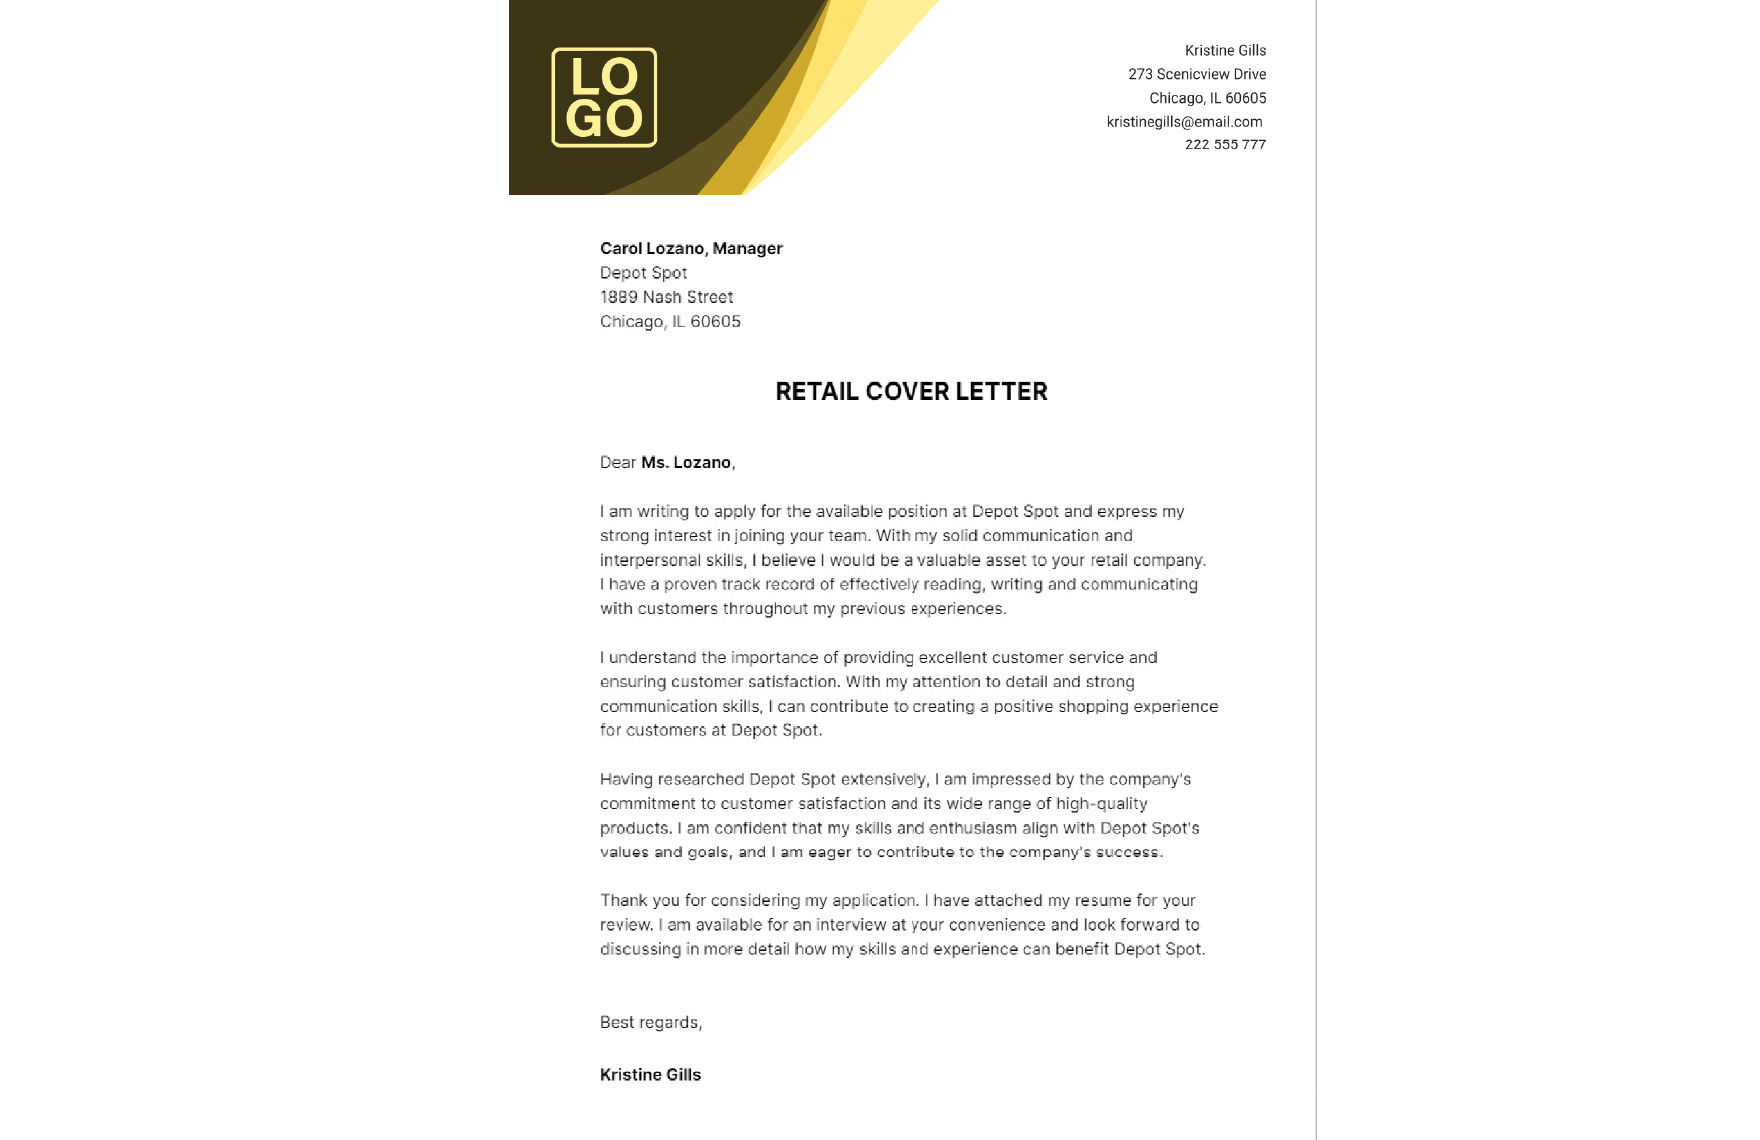 Retail Cover Letter  Template